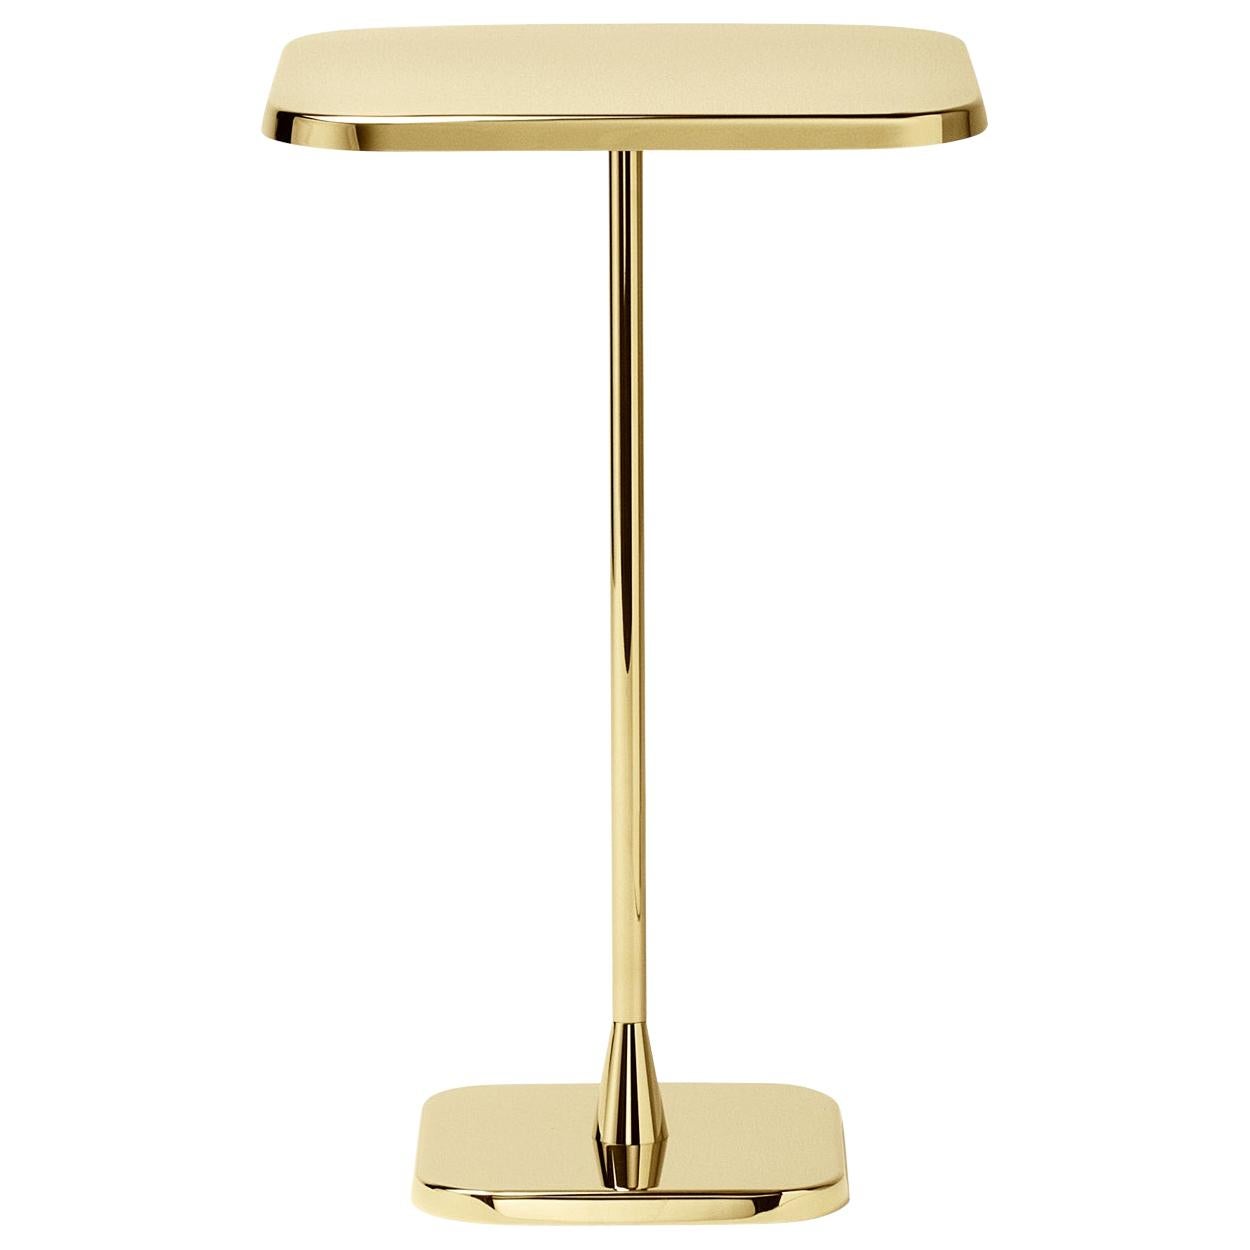 Opera Squared Table Gold By Richard Hutten